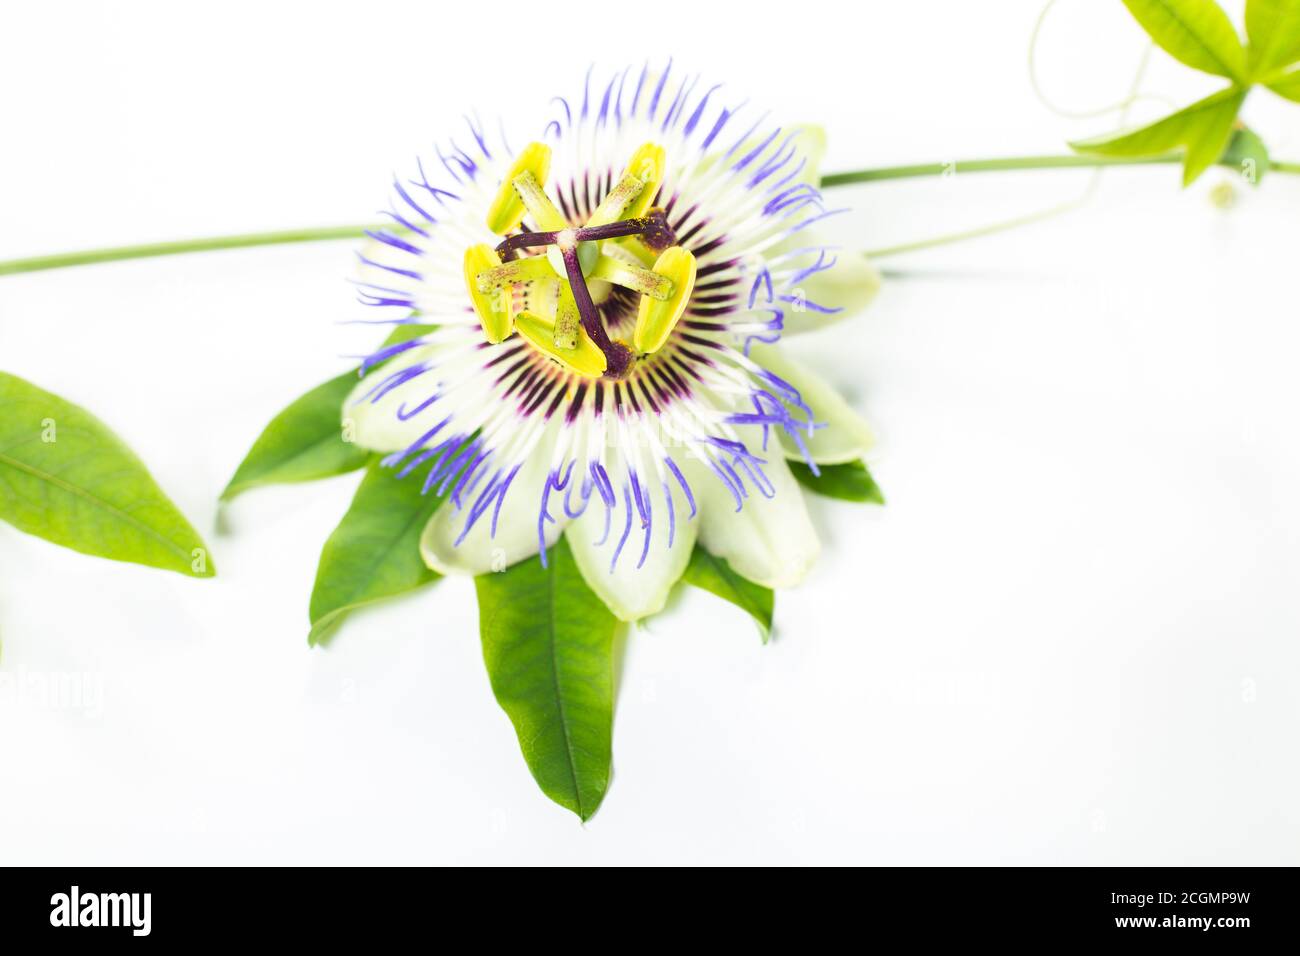 Passion flower (Passiflora incarnata). The leaves and stems are sedative. The purple passionflower isolated on white background Stock Photo